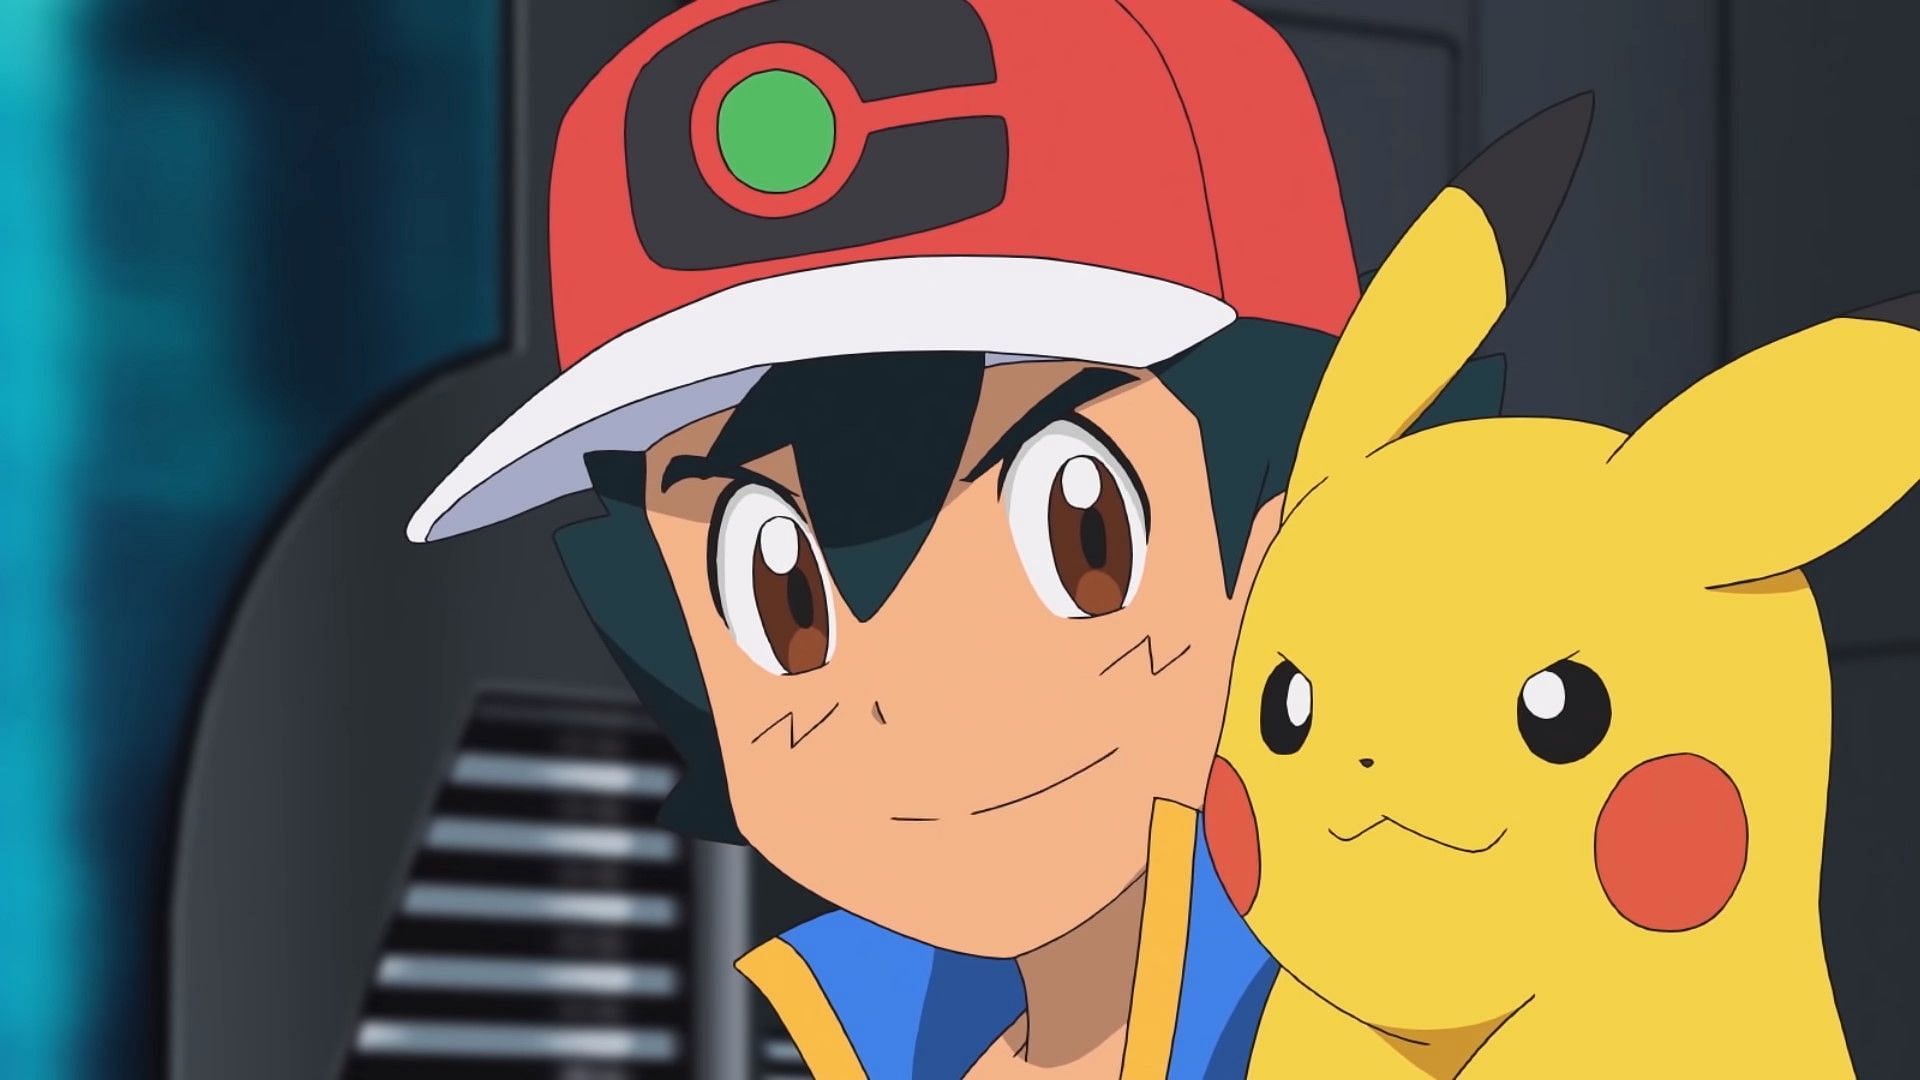 Pokemon: Why does Ash have lines on his face?